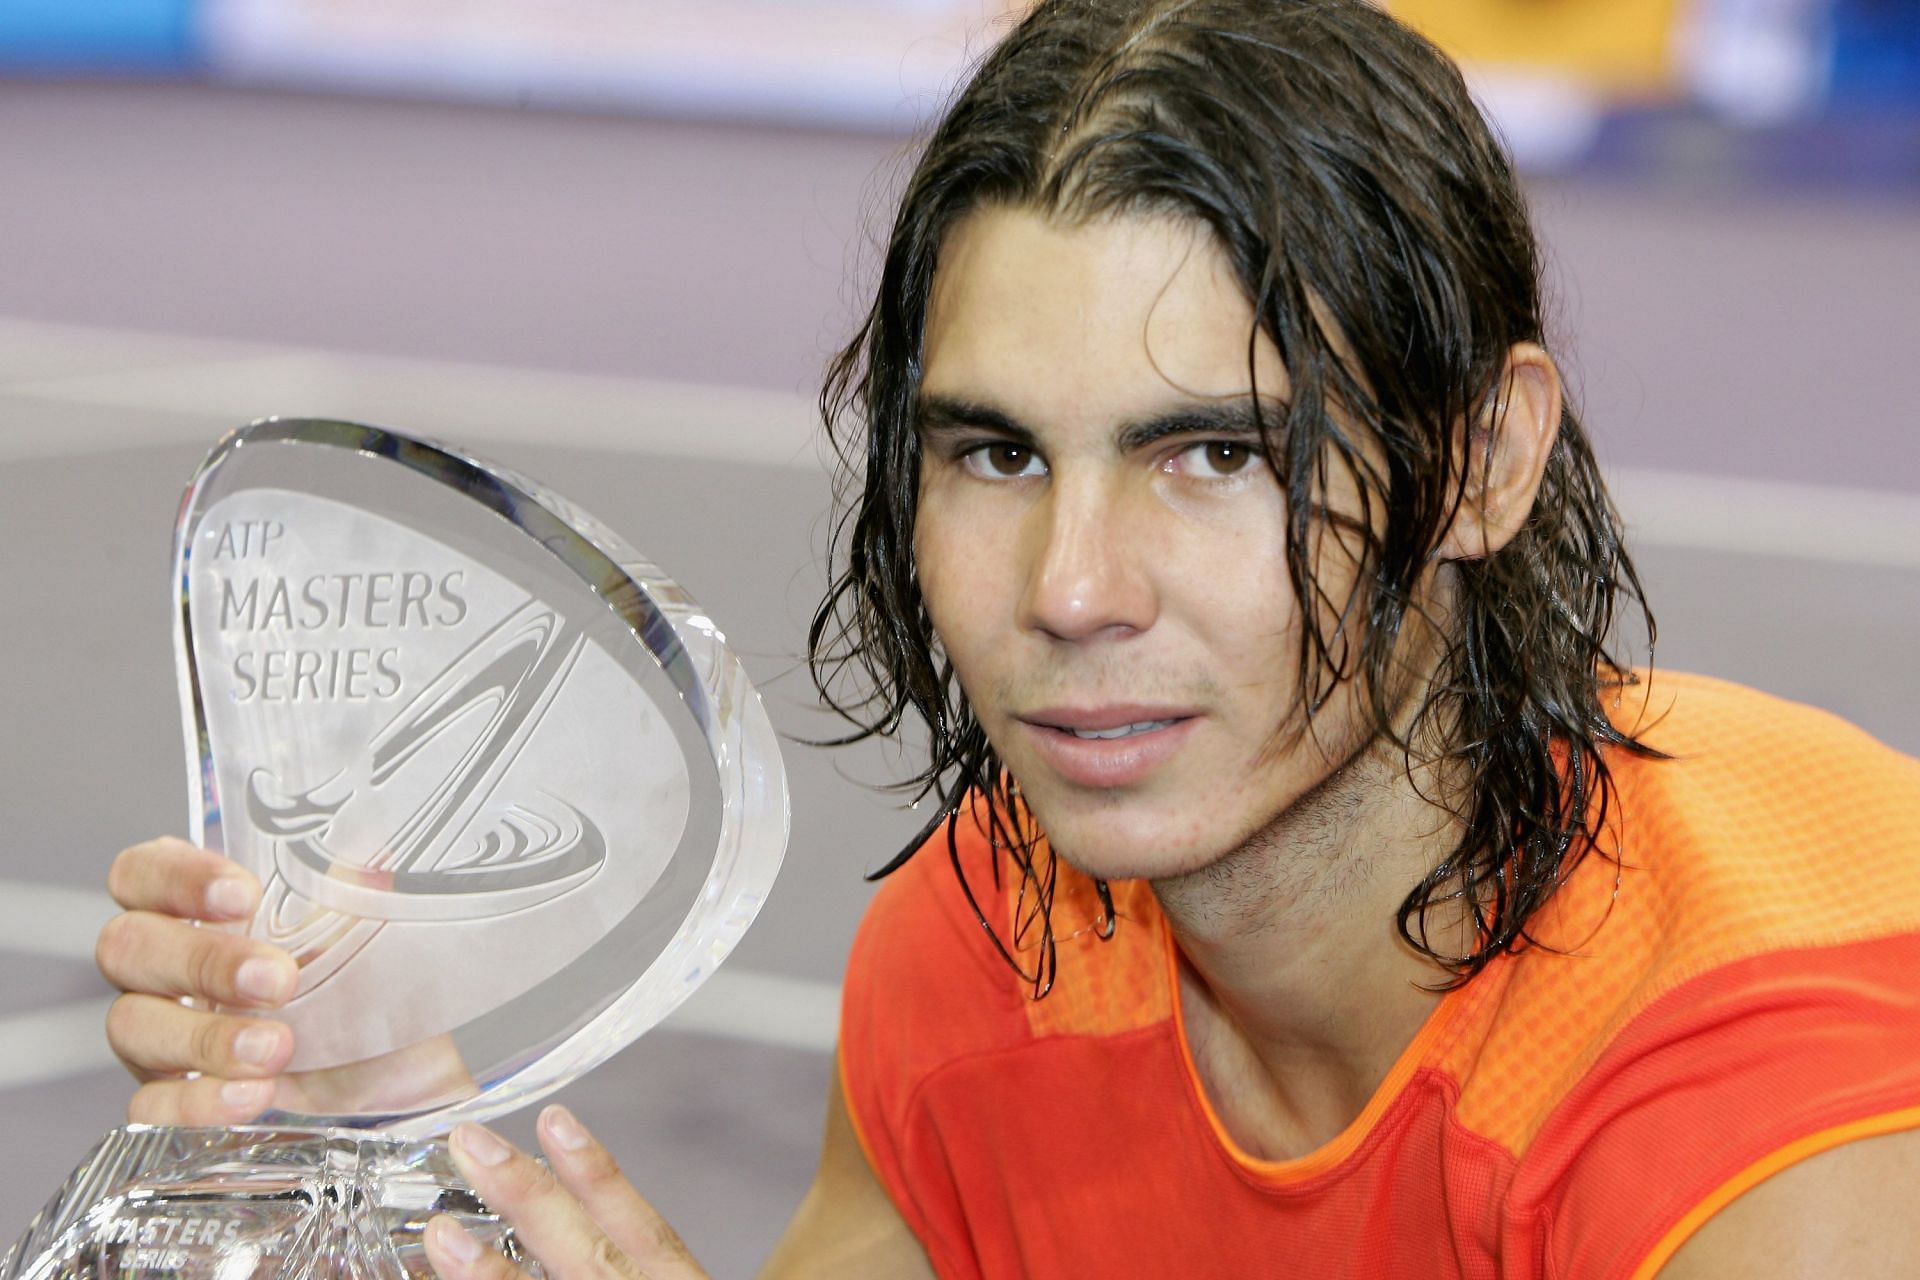 Nadal after winning his first Madrid Open title in 2005